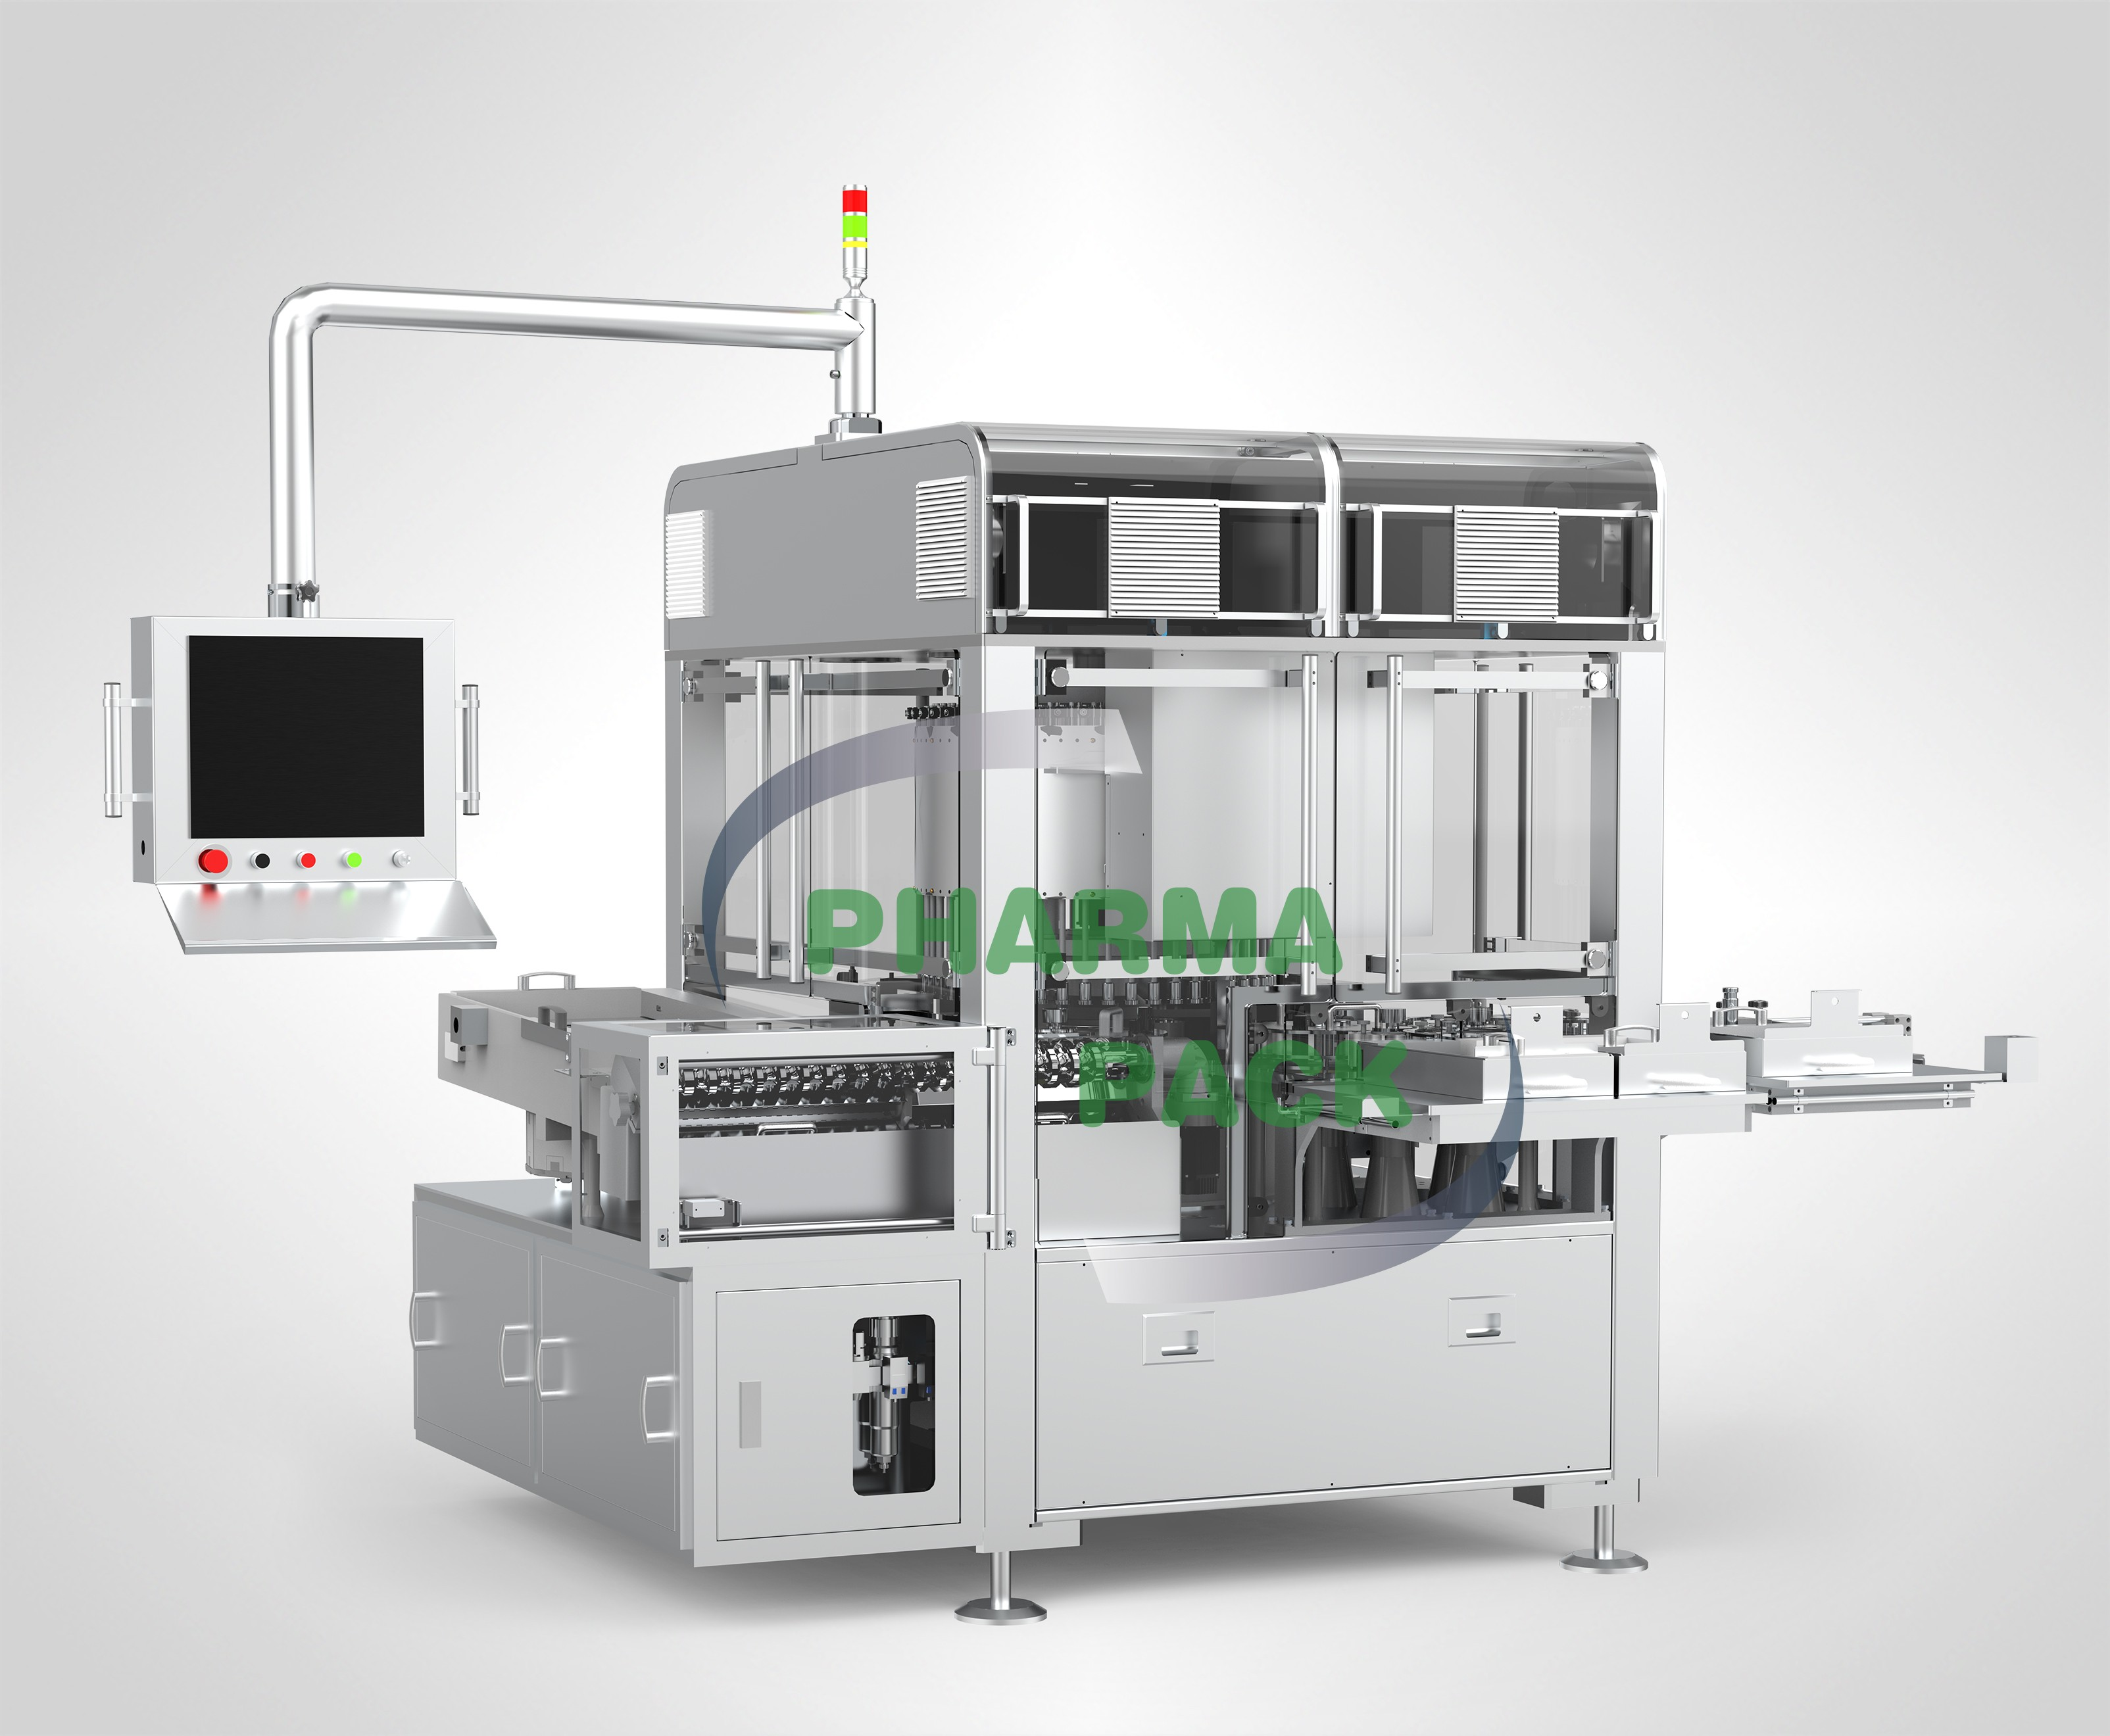 Revolutionary Design and Advanced Technology in the LFIM-48 Continuous Vision Inspection Machine for Pharmaceutical Industry